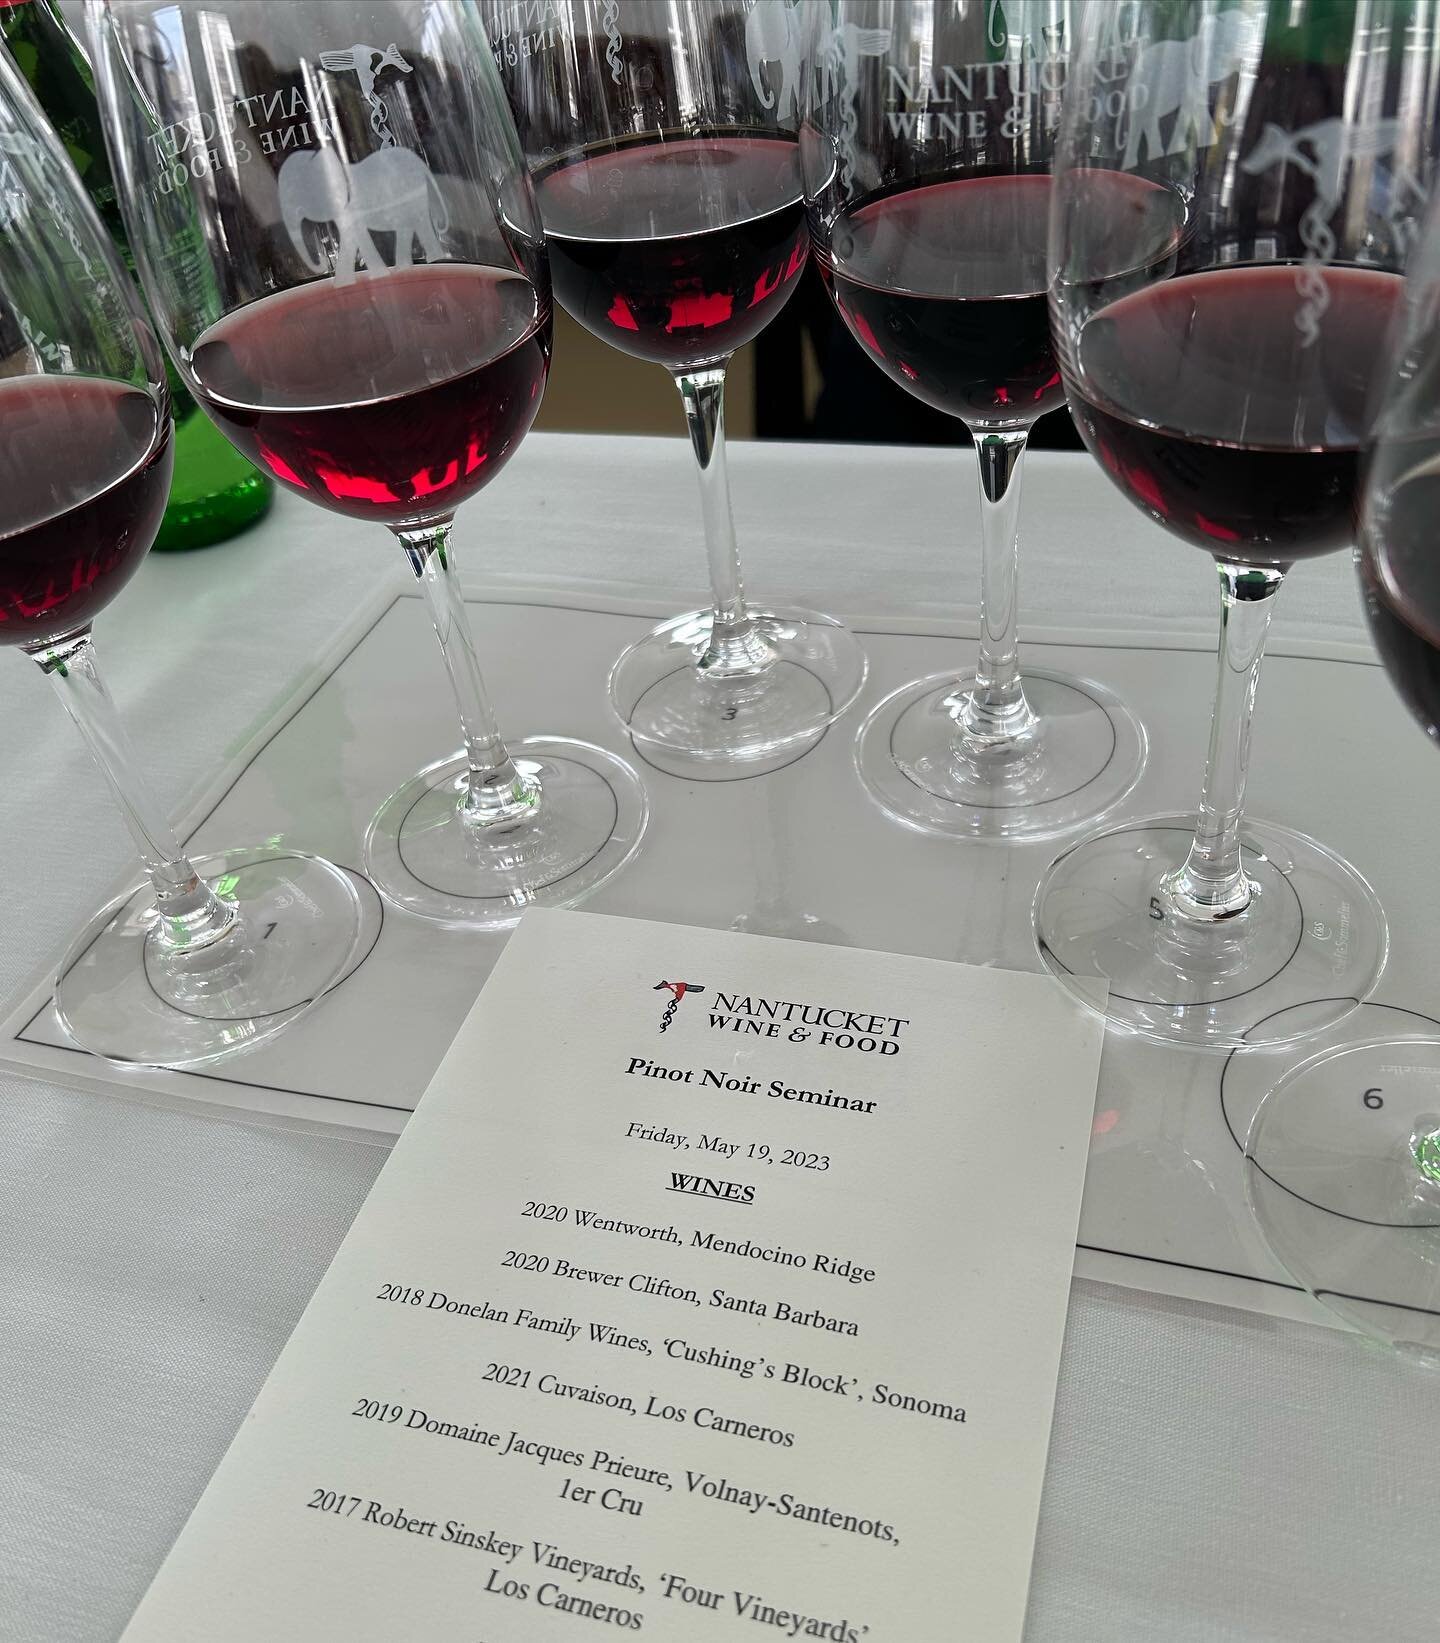 Fun participating in today&rsquo;s&rsquo;Mystical World of Pinot Noir&rsquo; panel led by @vtdavidkeckms @nantucketwineandfood alongside several other fine Pinot Noir producers including @rsvnapa @donelanwine @brewerclifton @cuvaison_wine and @jacque